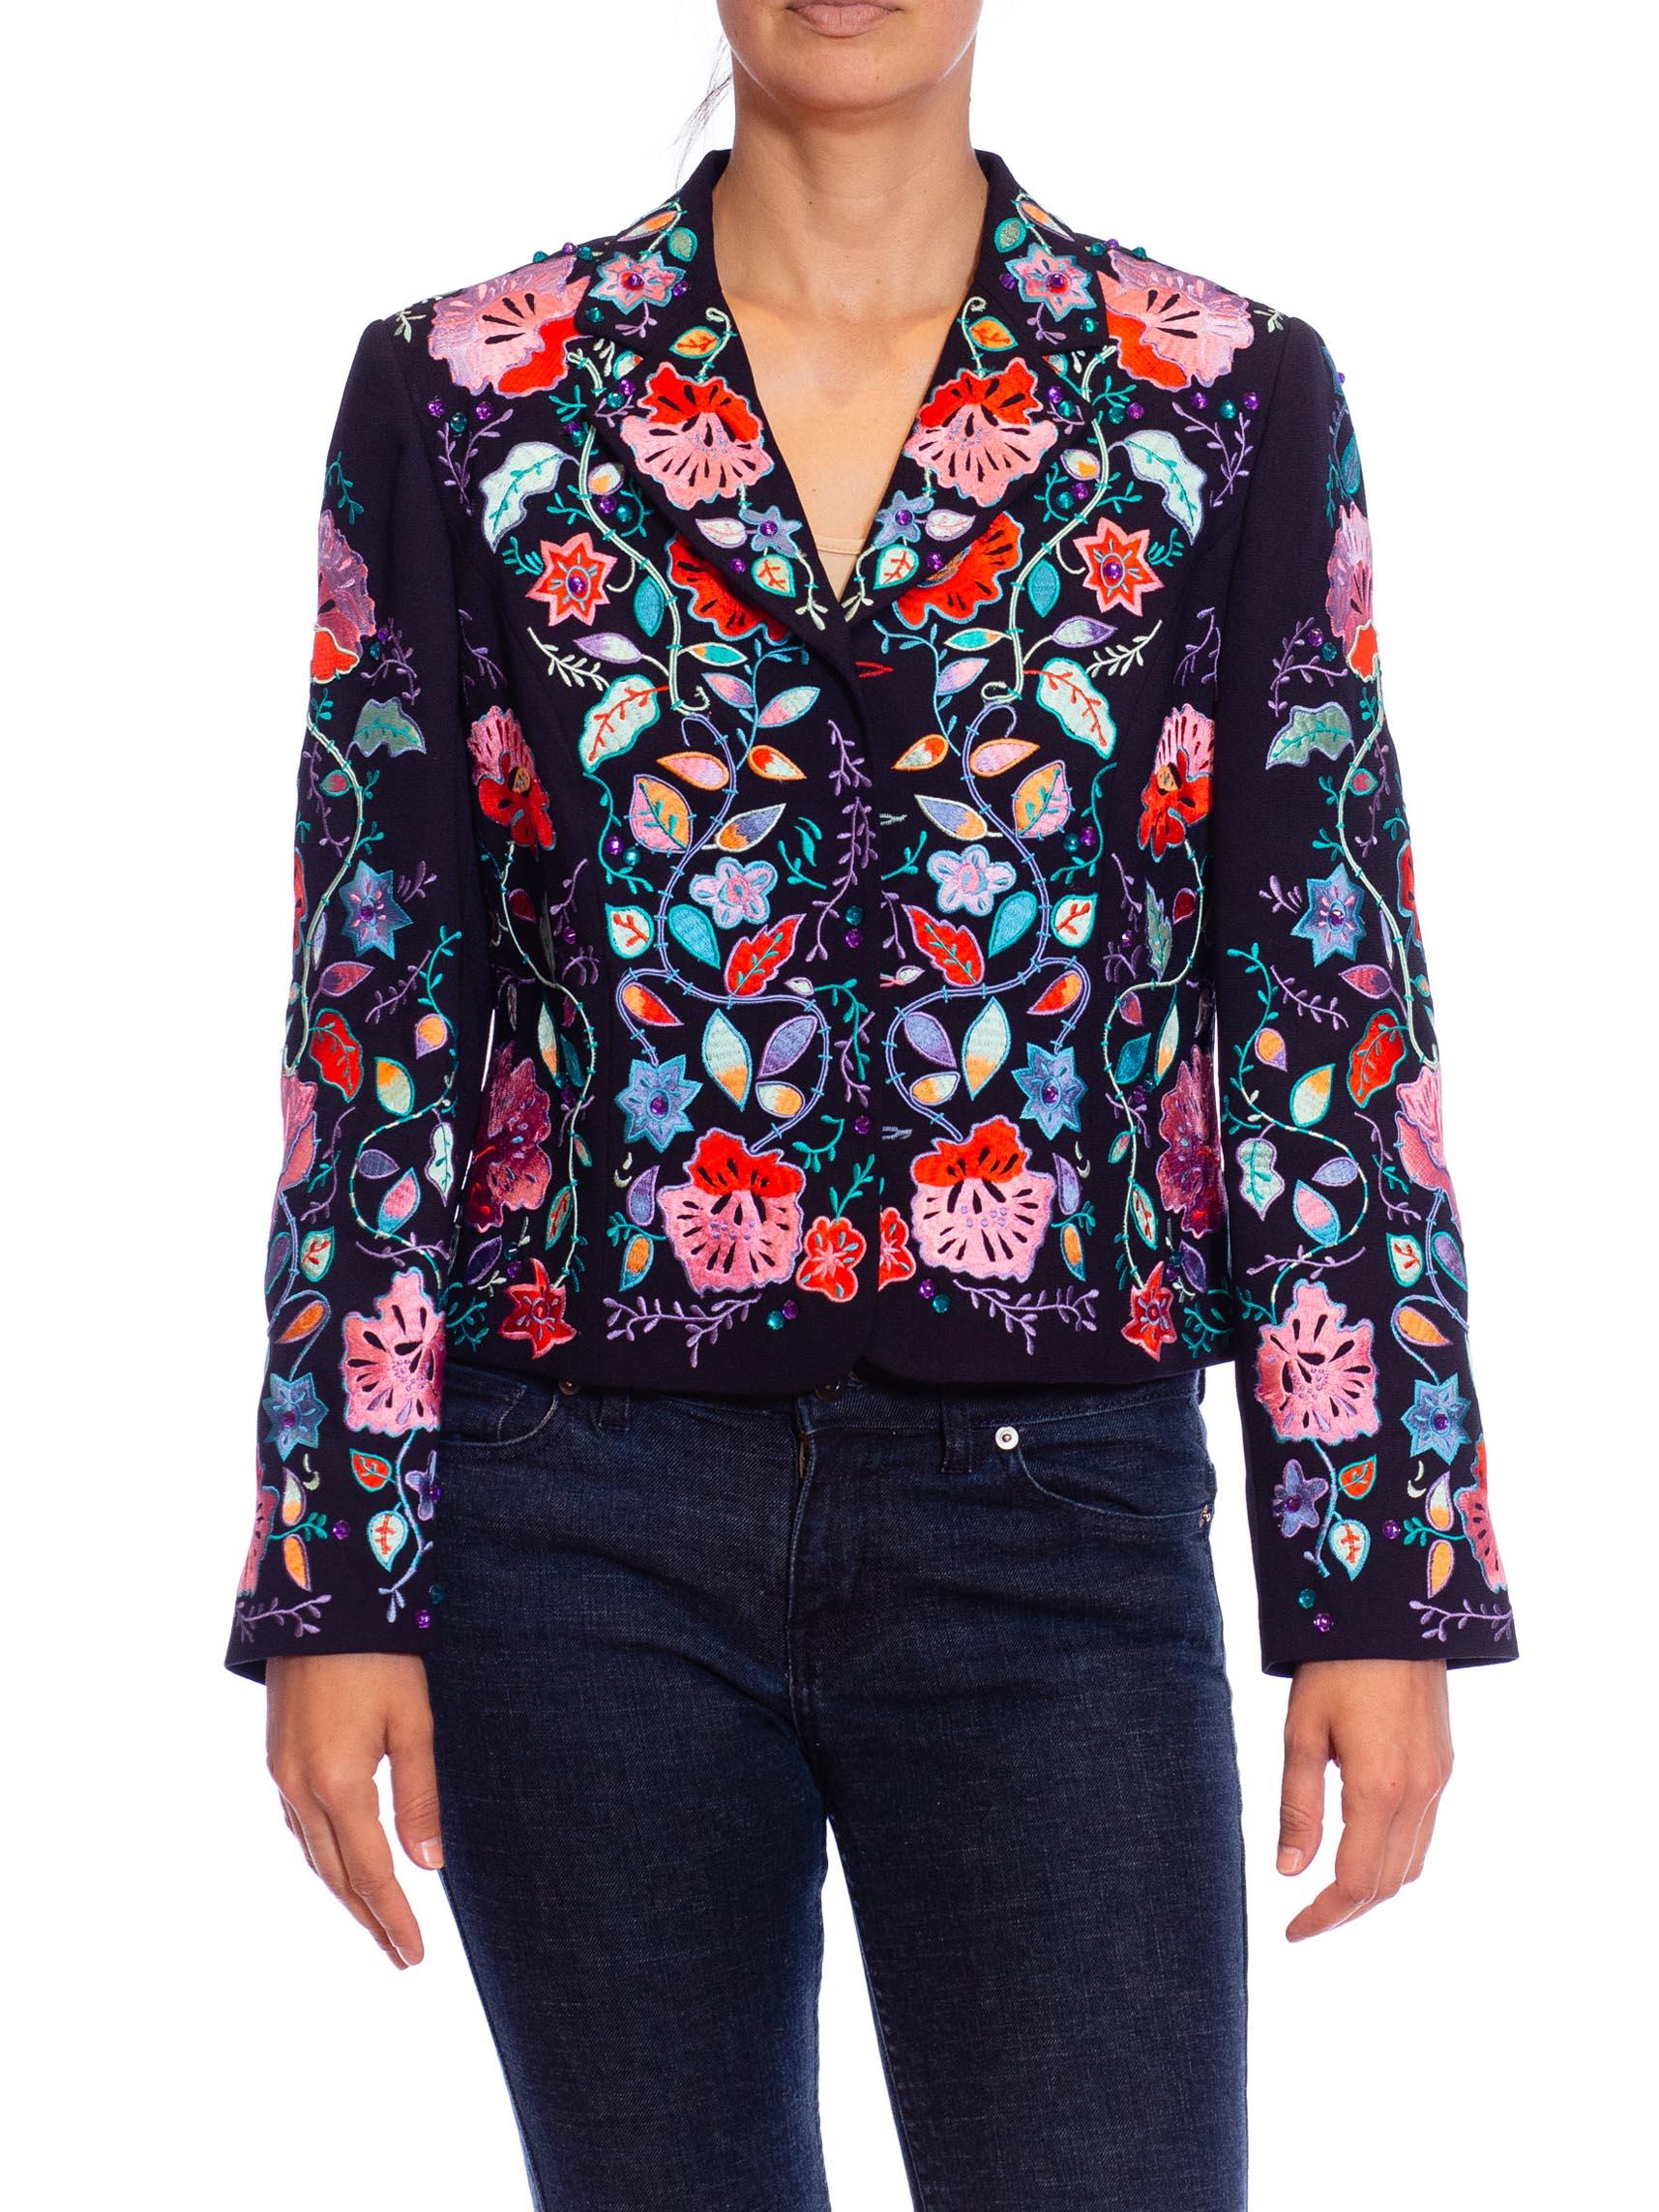 1990s black cotton jacket covered in embroidered pink and purple flowers